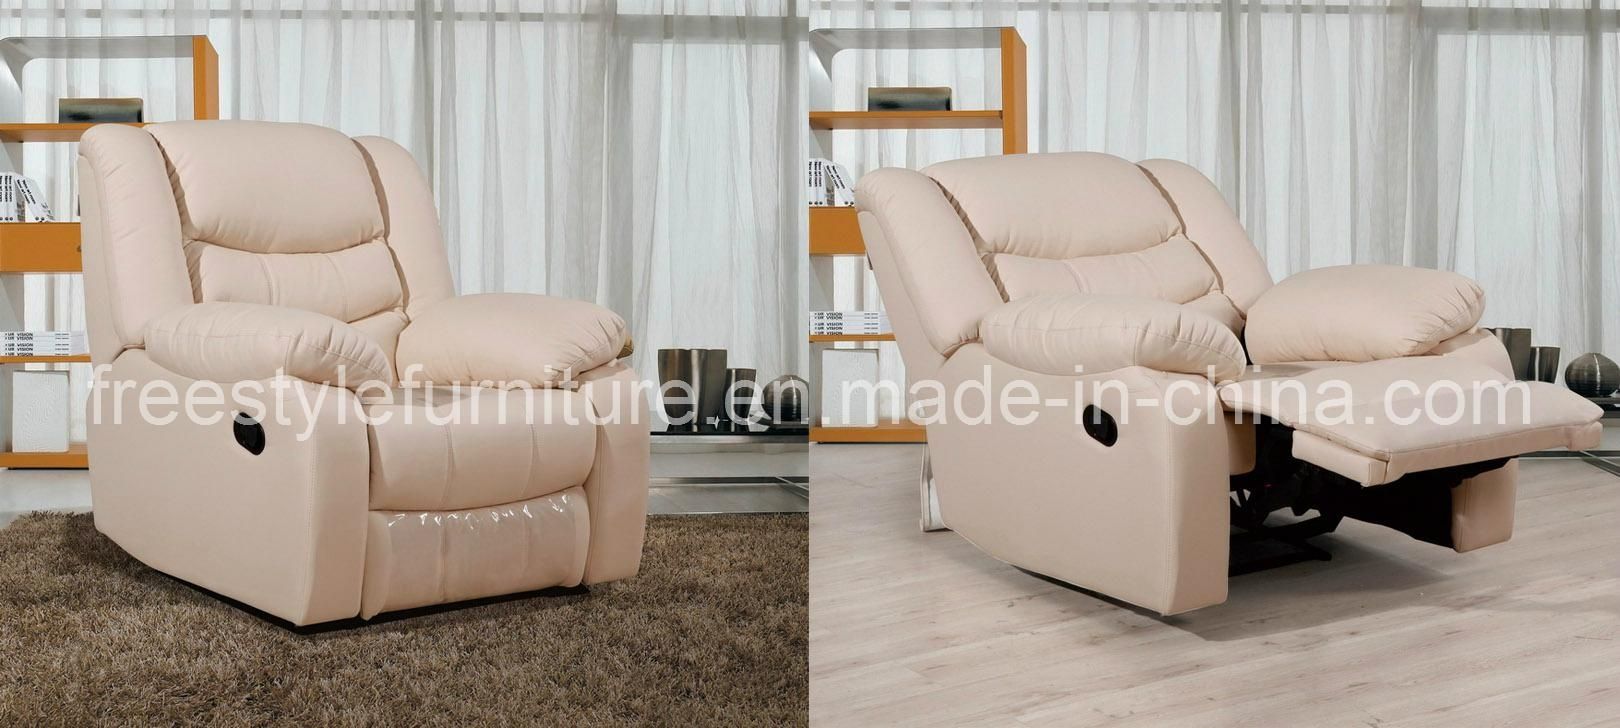 Sofas Center : Rocking Chairs Sofa Targetsofa Chair For With Sofa Rocking Chairs (View 1 of 20)